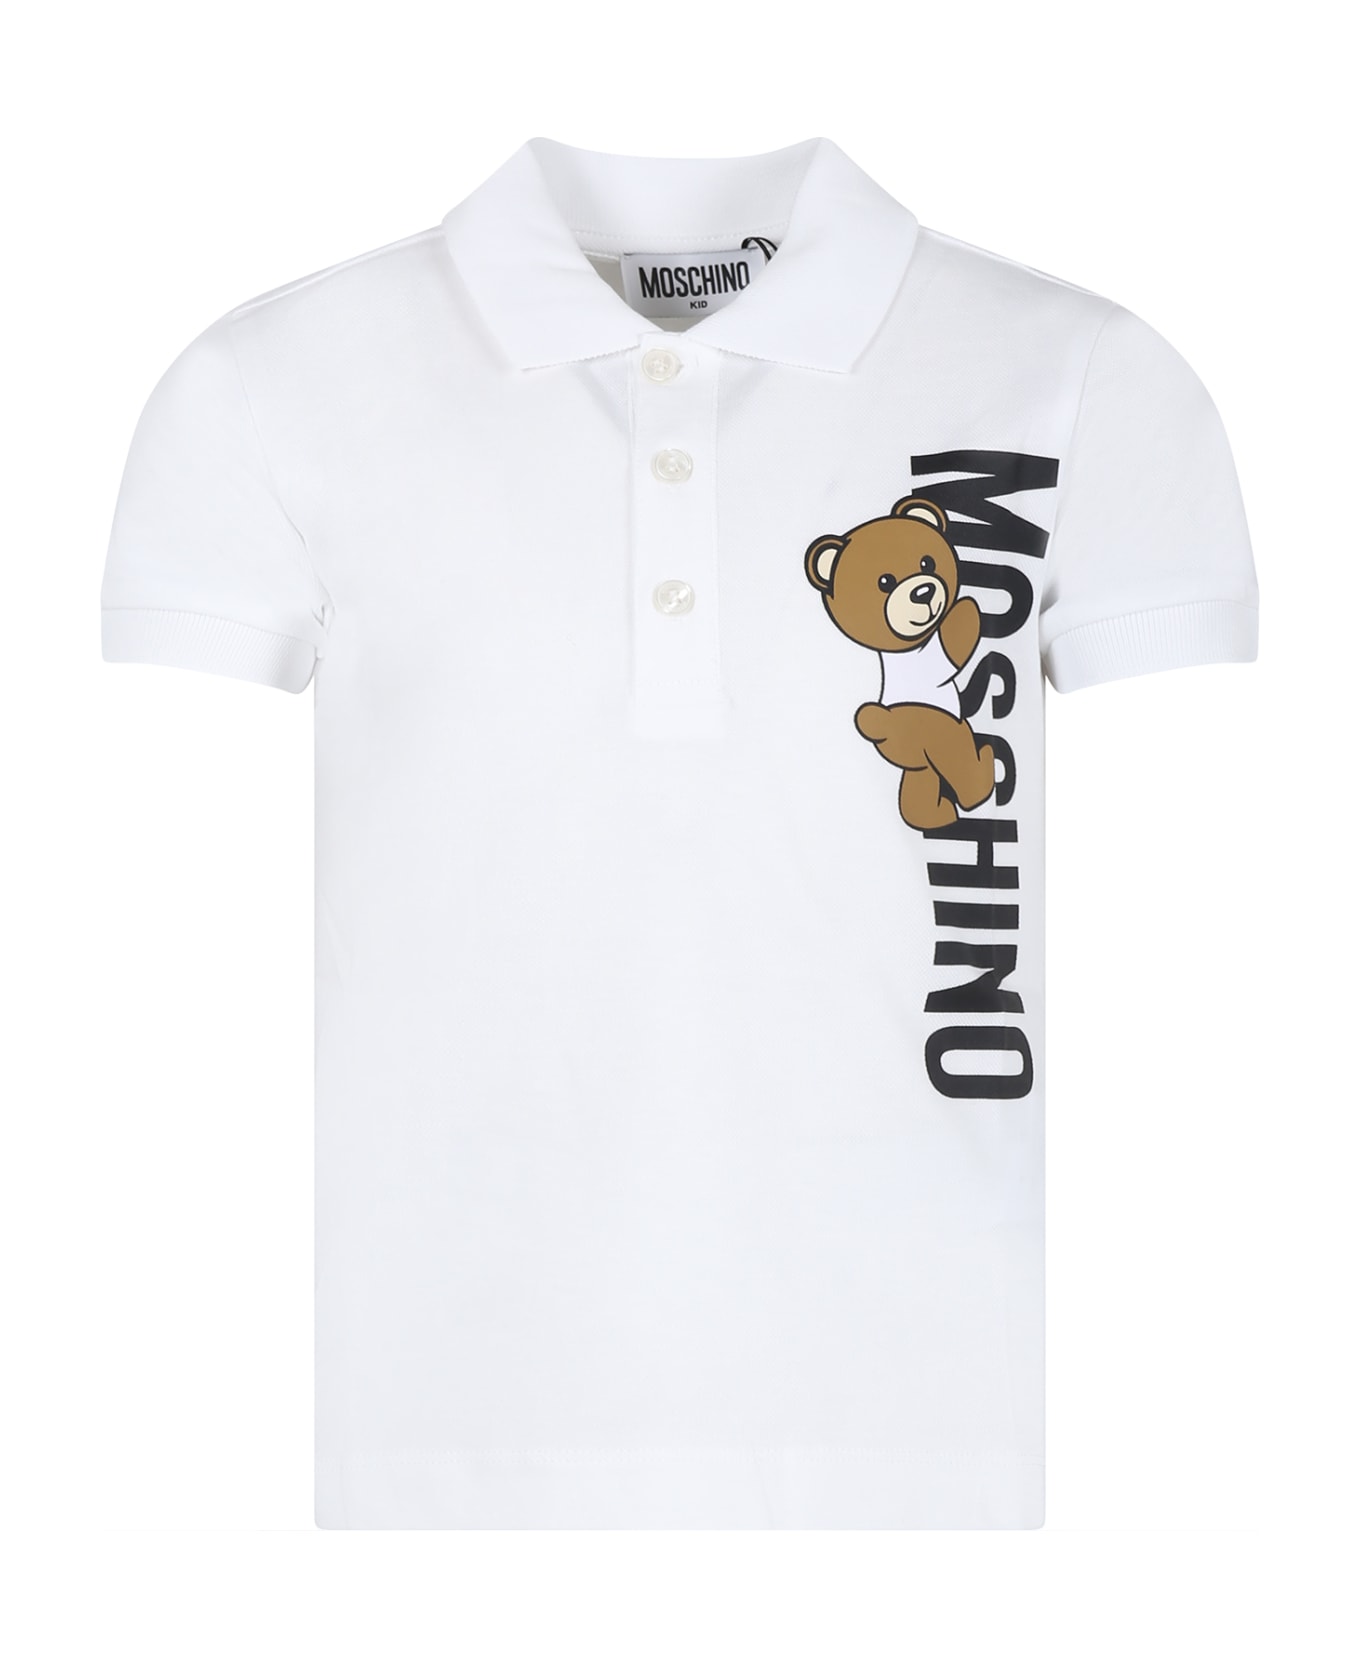 Moschino White Polo Shirt For Boy With Teddy Bear And Logo - White